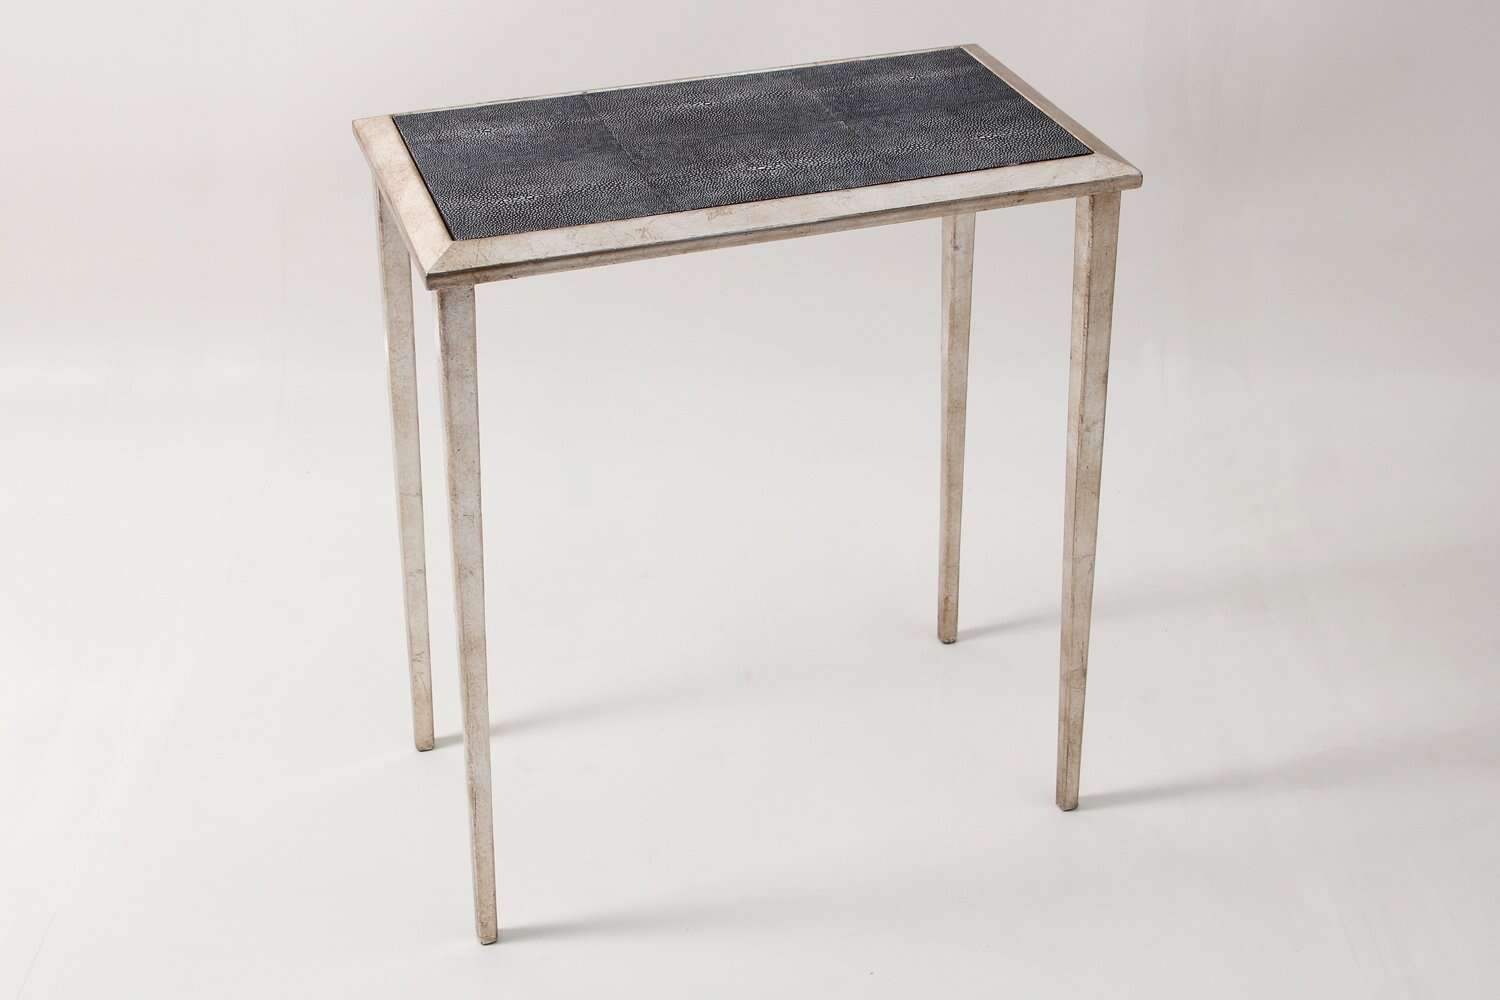 Grey lamp table Shagreen lamp table small occasional table